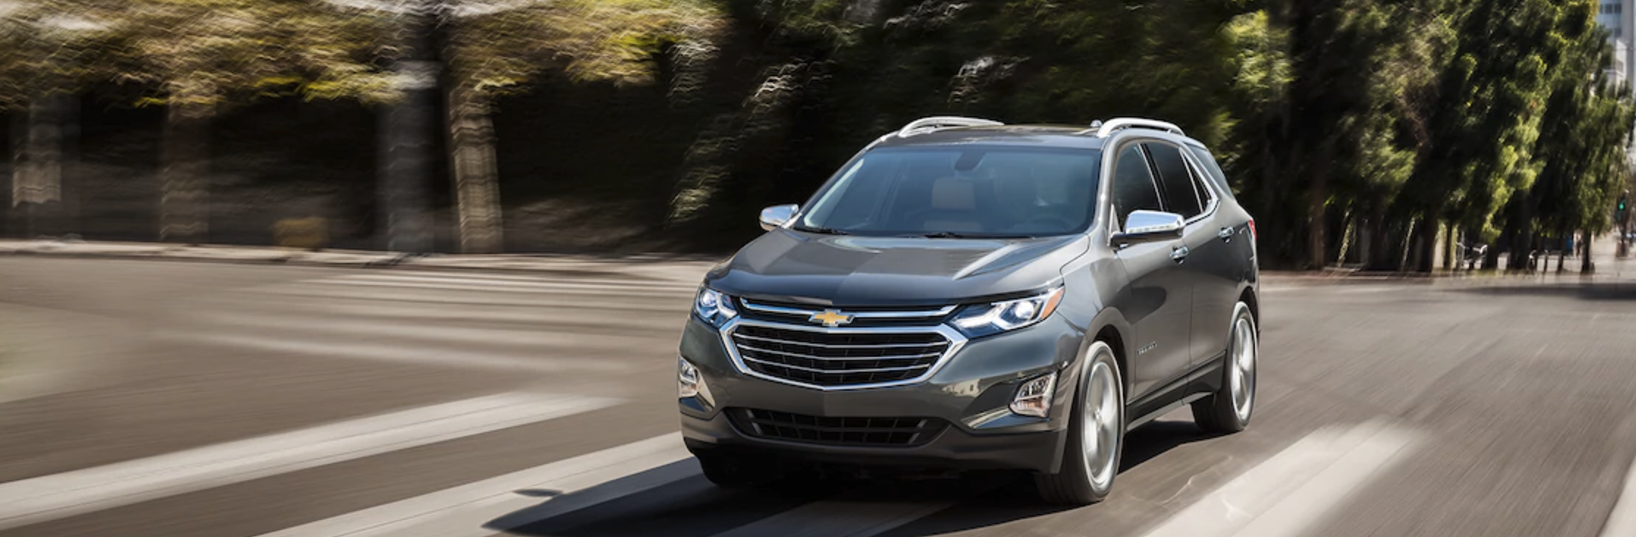 A gray 2018 Chevy Equinox driving down the street.